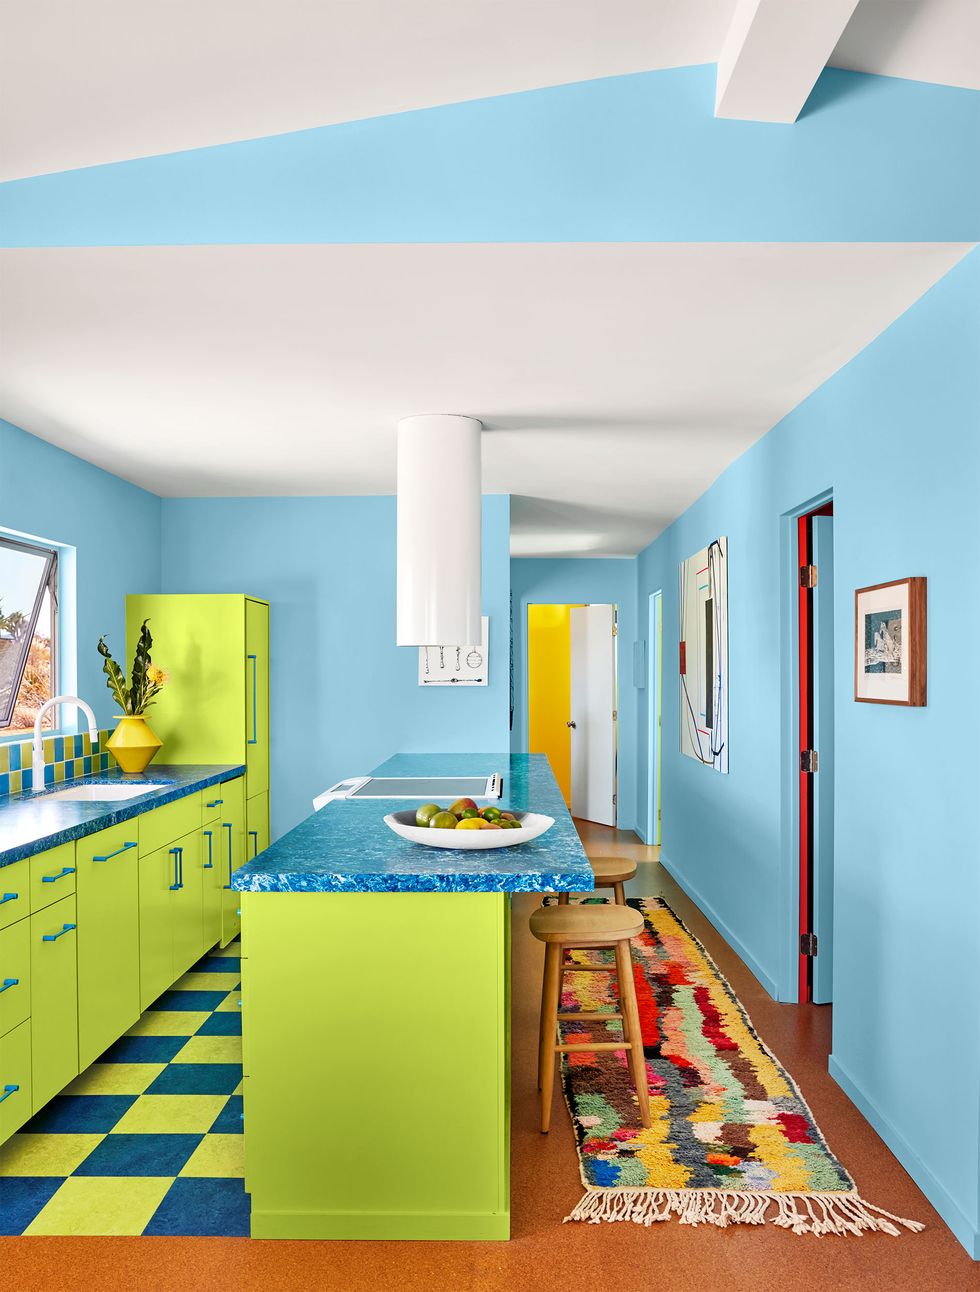 Green Kitchen Paint Colors and Green Wallpapers for Kitchen Decorating